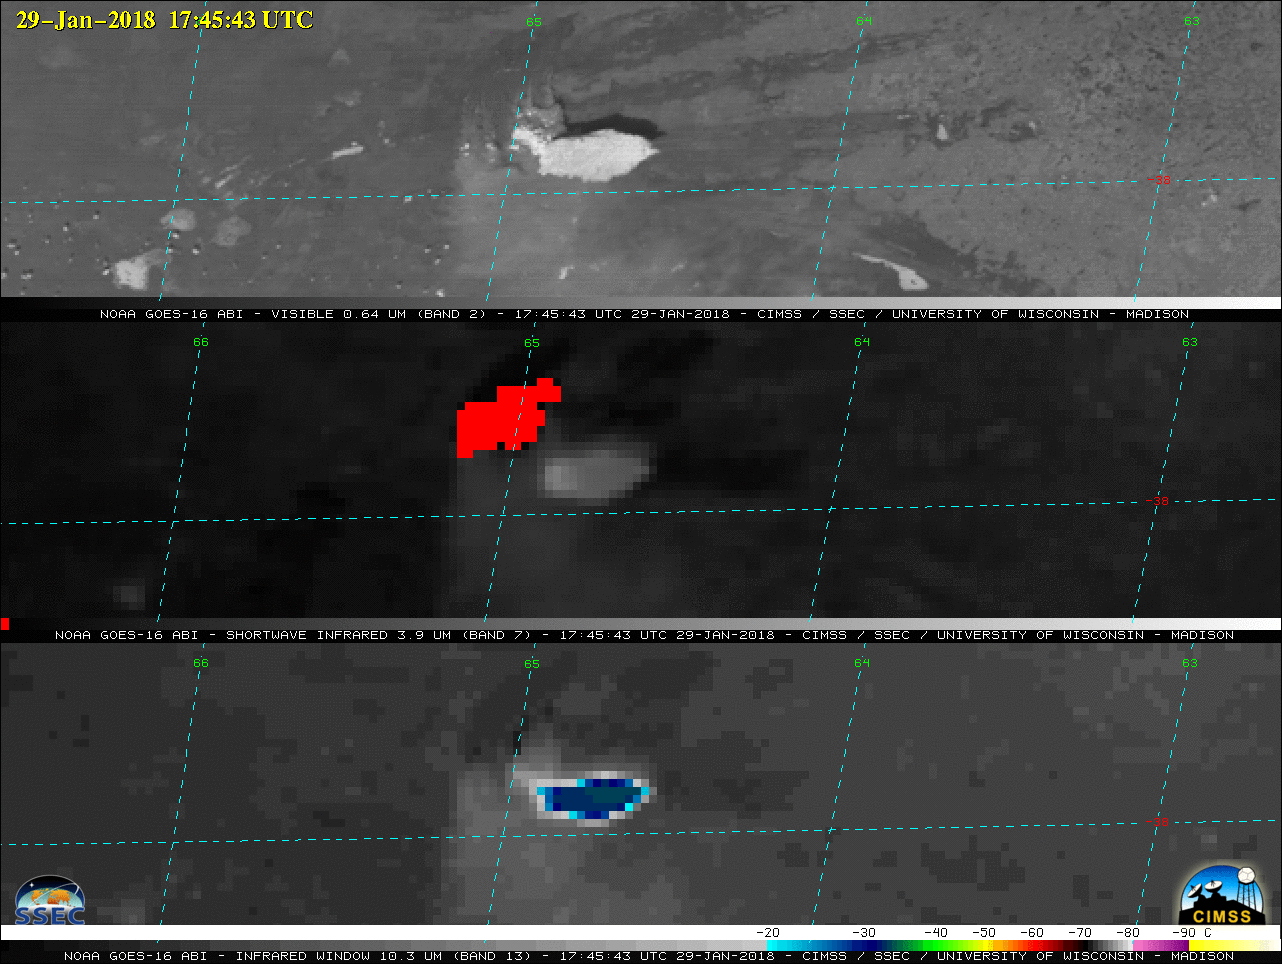 GOES-16 Visible (0.64 µm, top), Shortwave Infrared (3.9 µm, center) and Infrared Window (10.3 µm) images [click to play animation]